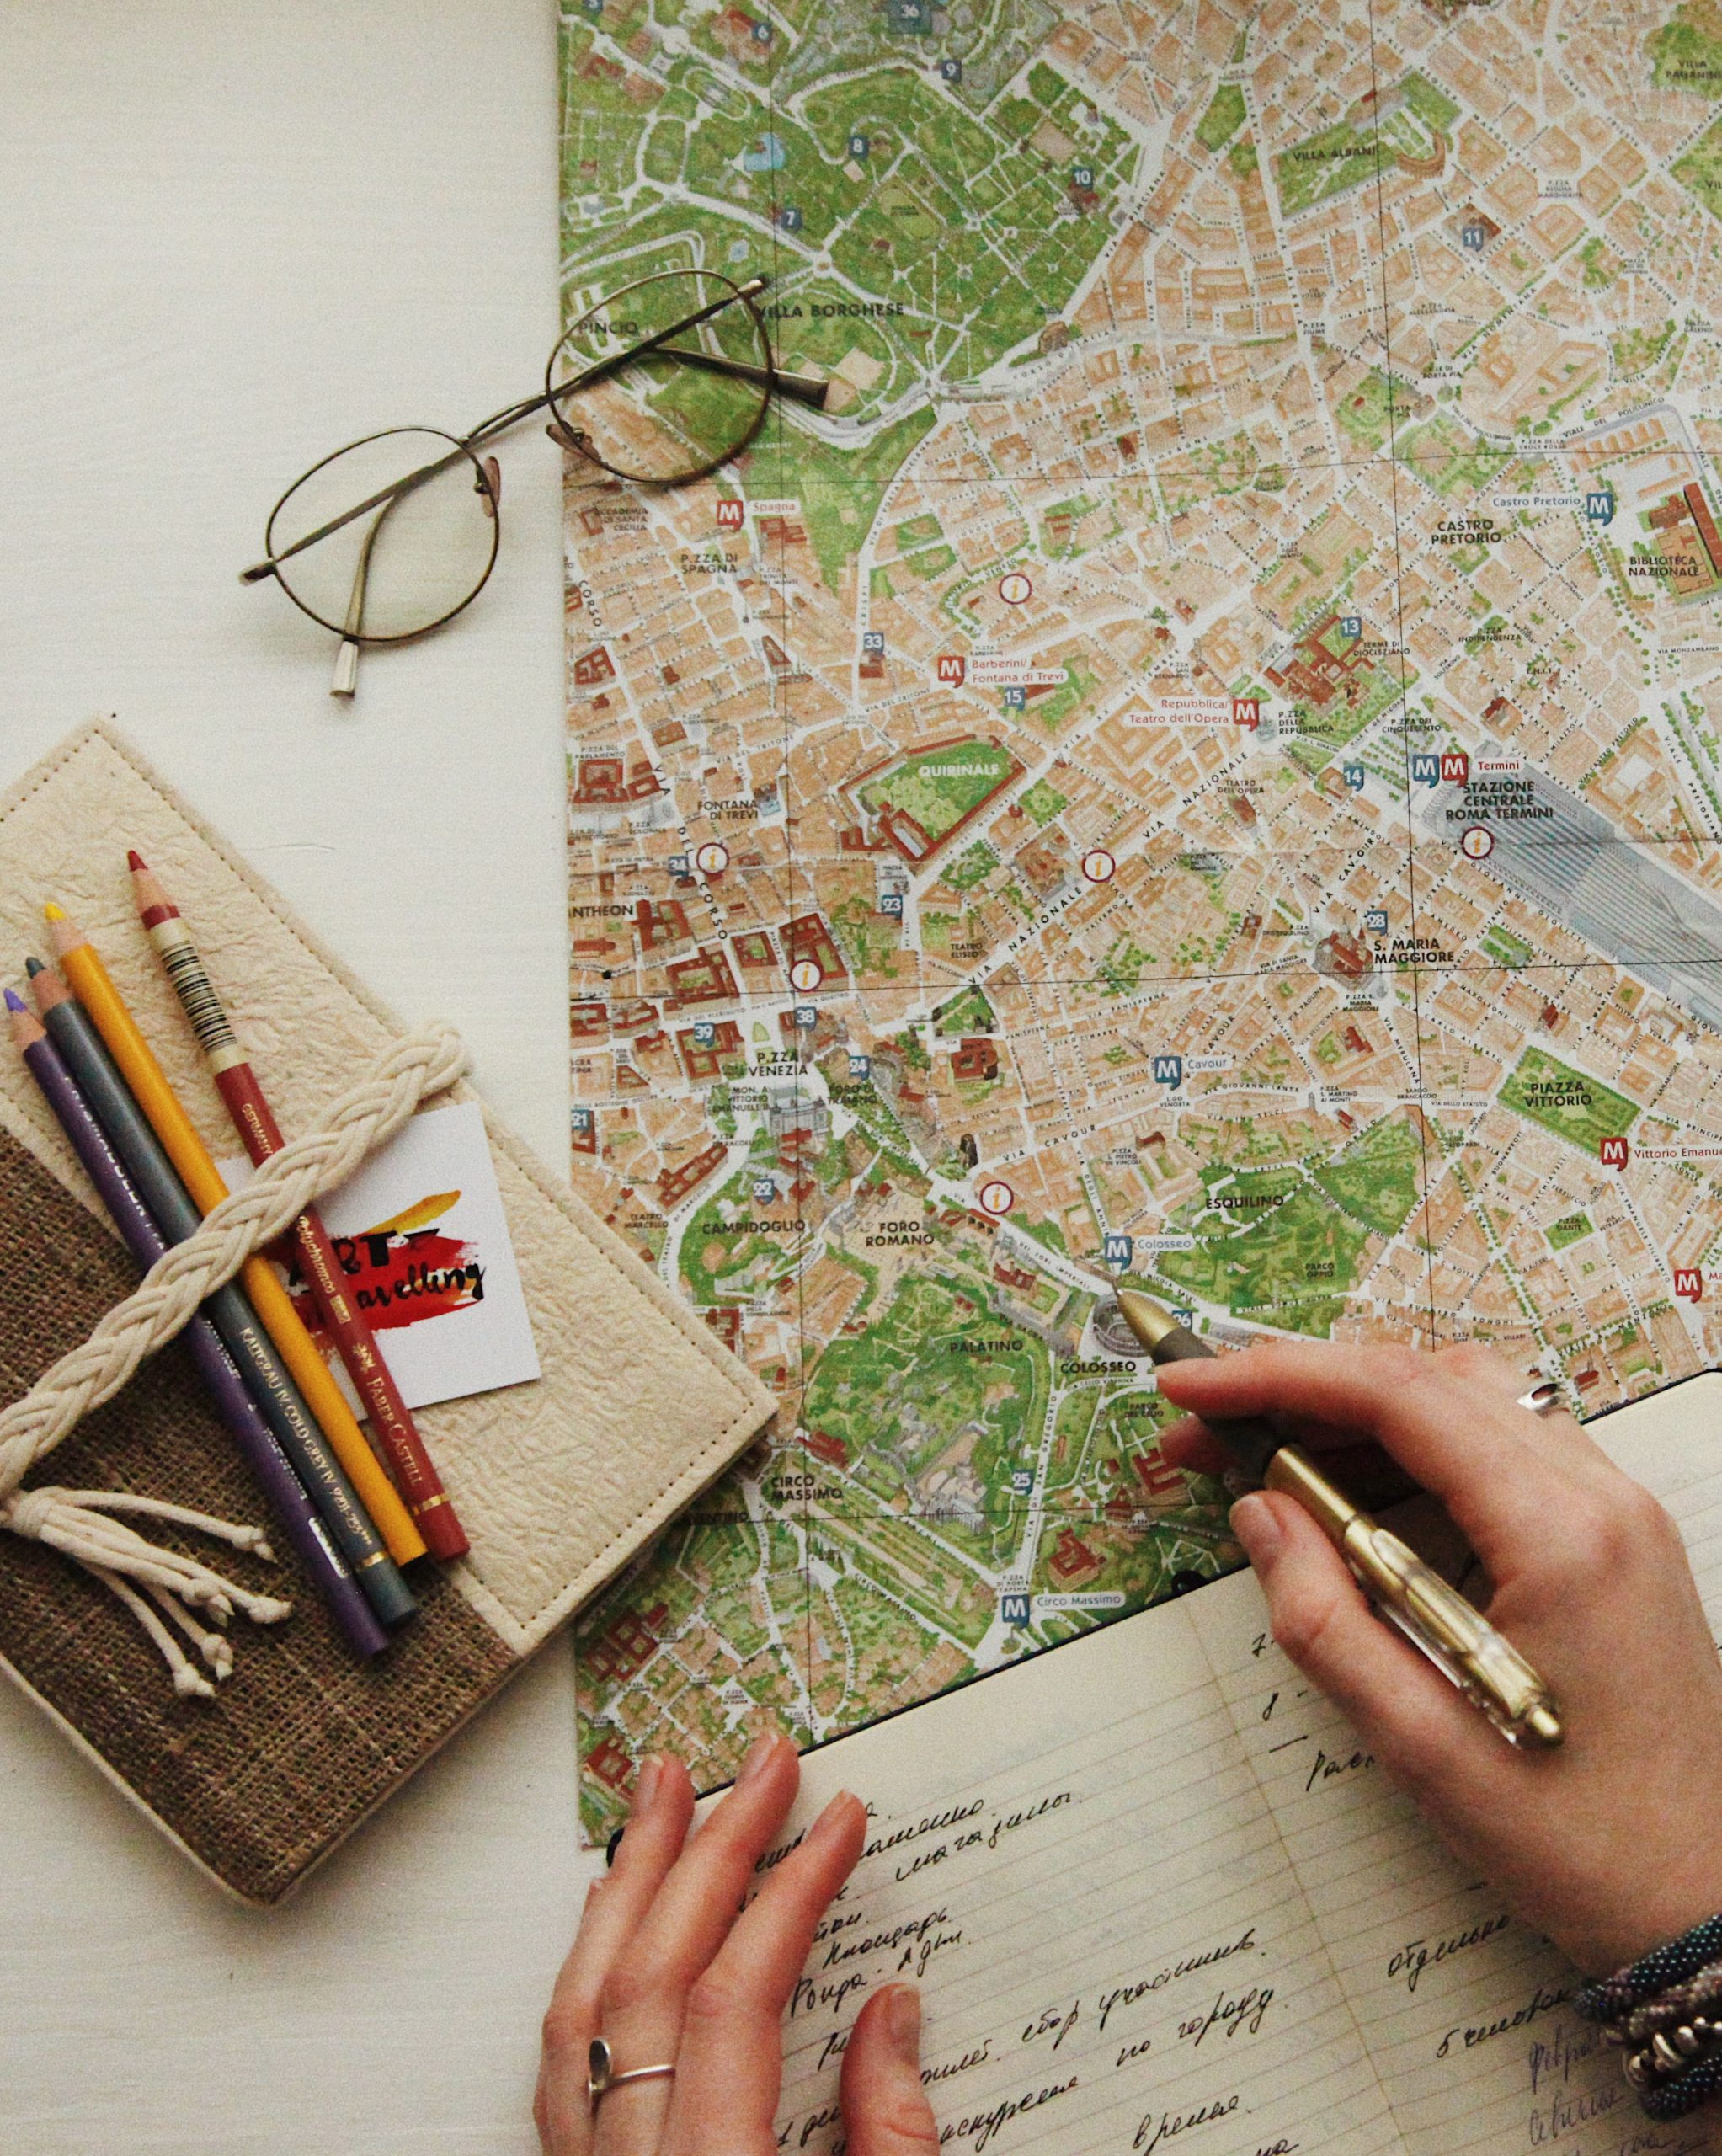 Overhead image of a person reviewing a map while writing in a open notebook. A pair of glasses, a journal, and pecils lie beside the map